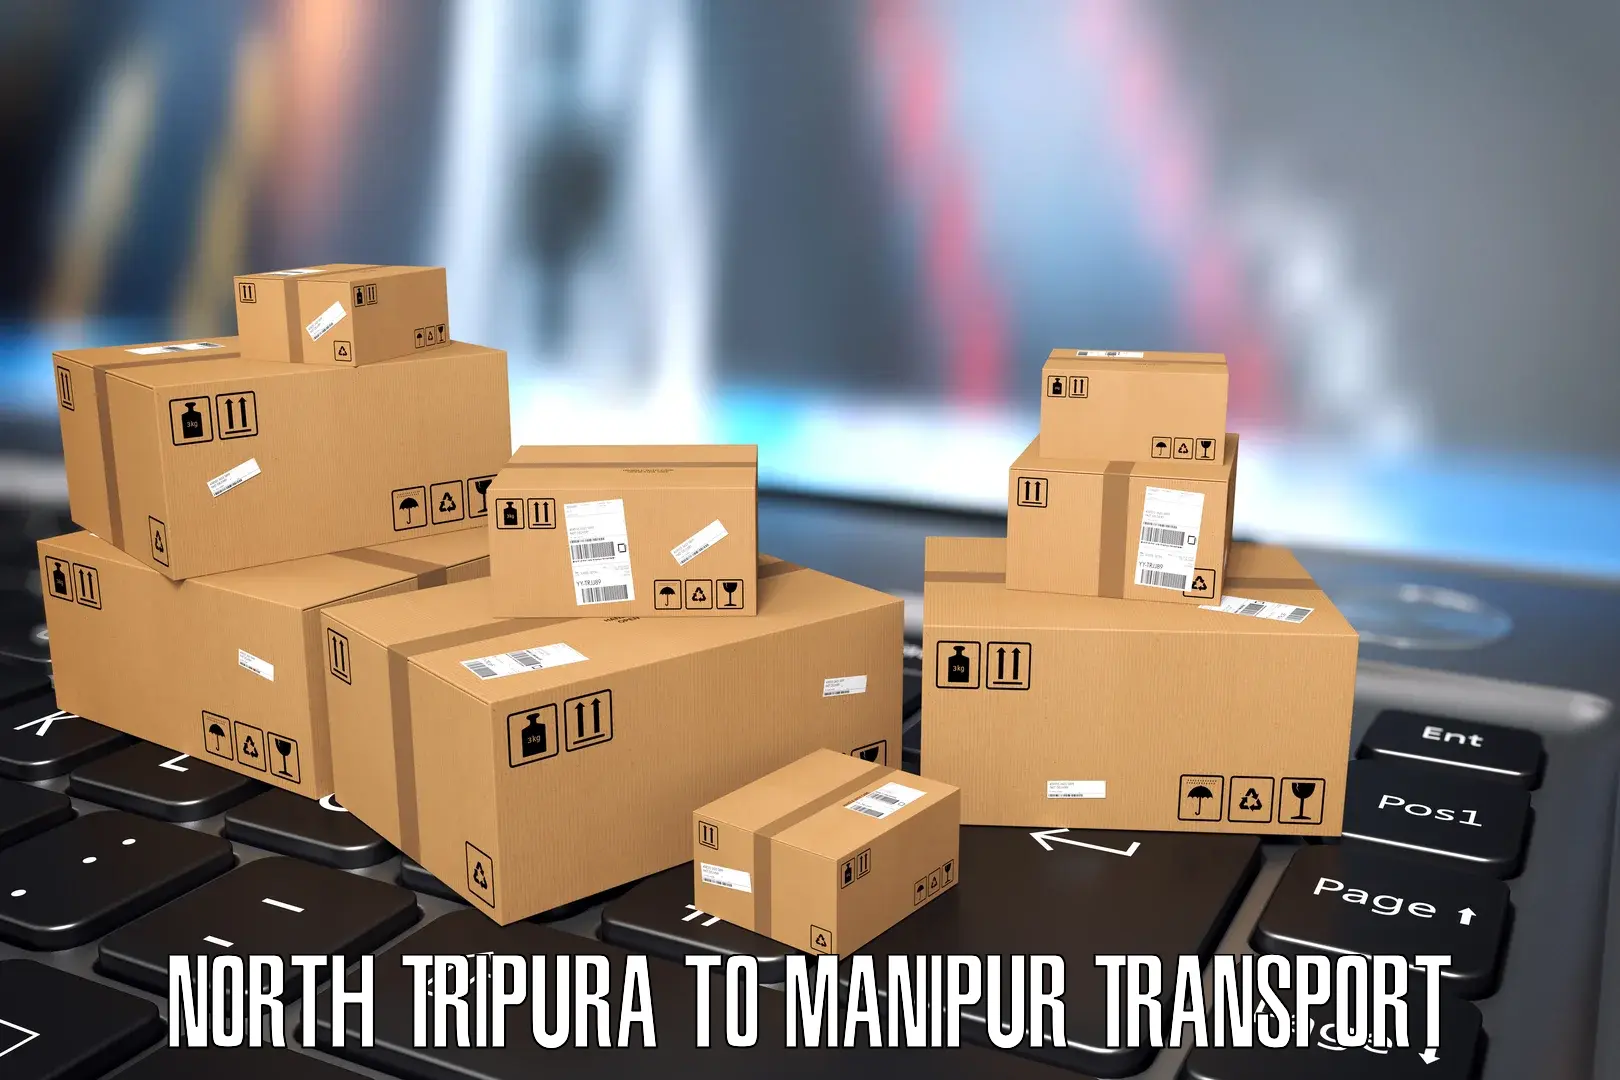 Air cargo transport services in North Tripura to Imphal